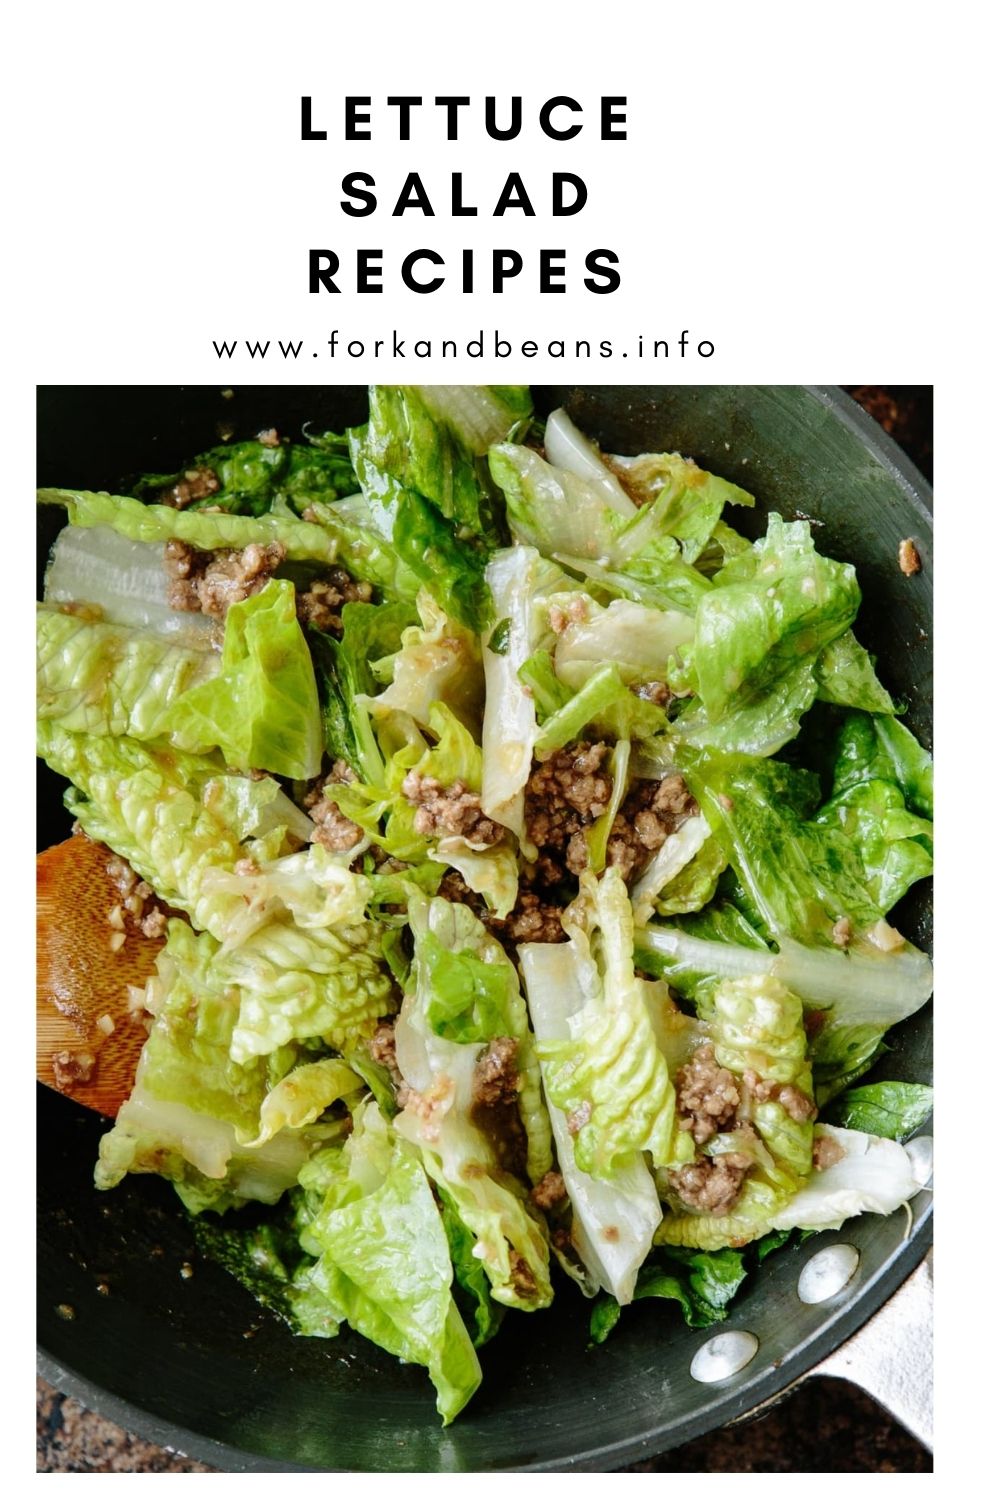 Lettuce Salad with Hot Beef Dressing